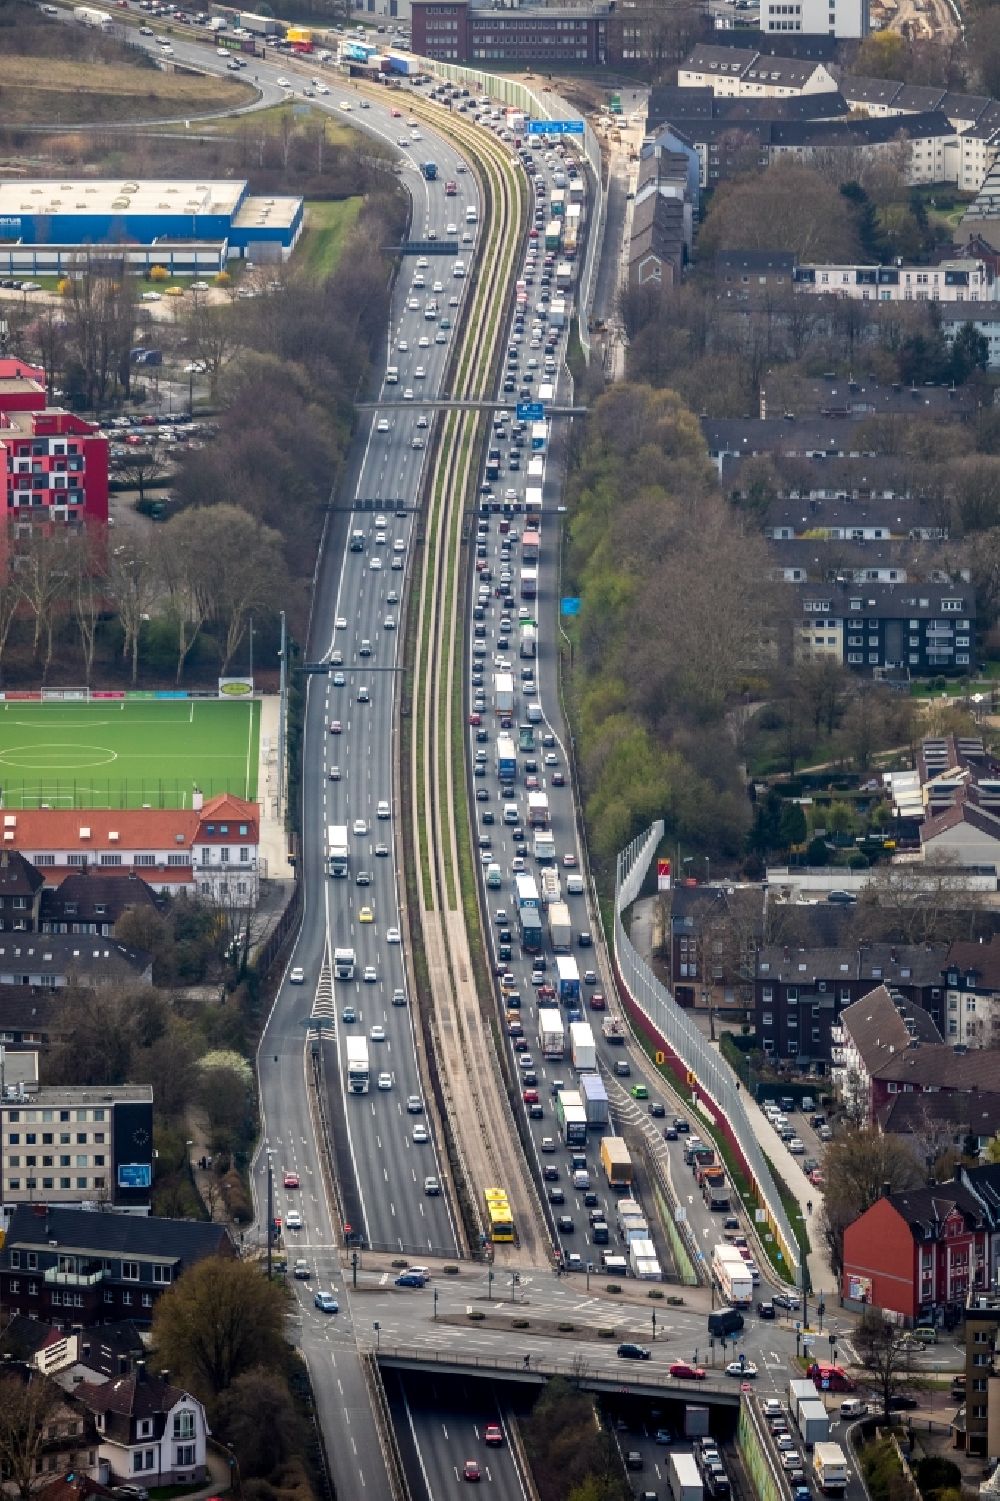 Aerial photograph Essen - Highway congestion along the route of the lanes BAB A40 - A52 in the district Frillendorf in Essen in the state North Rhine-Westphalia, Germany